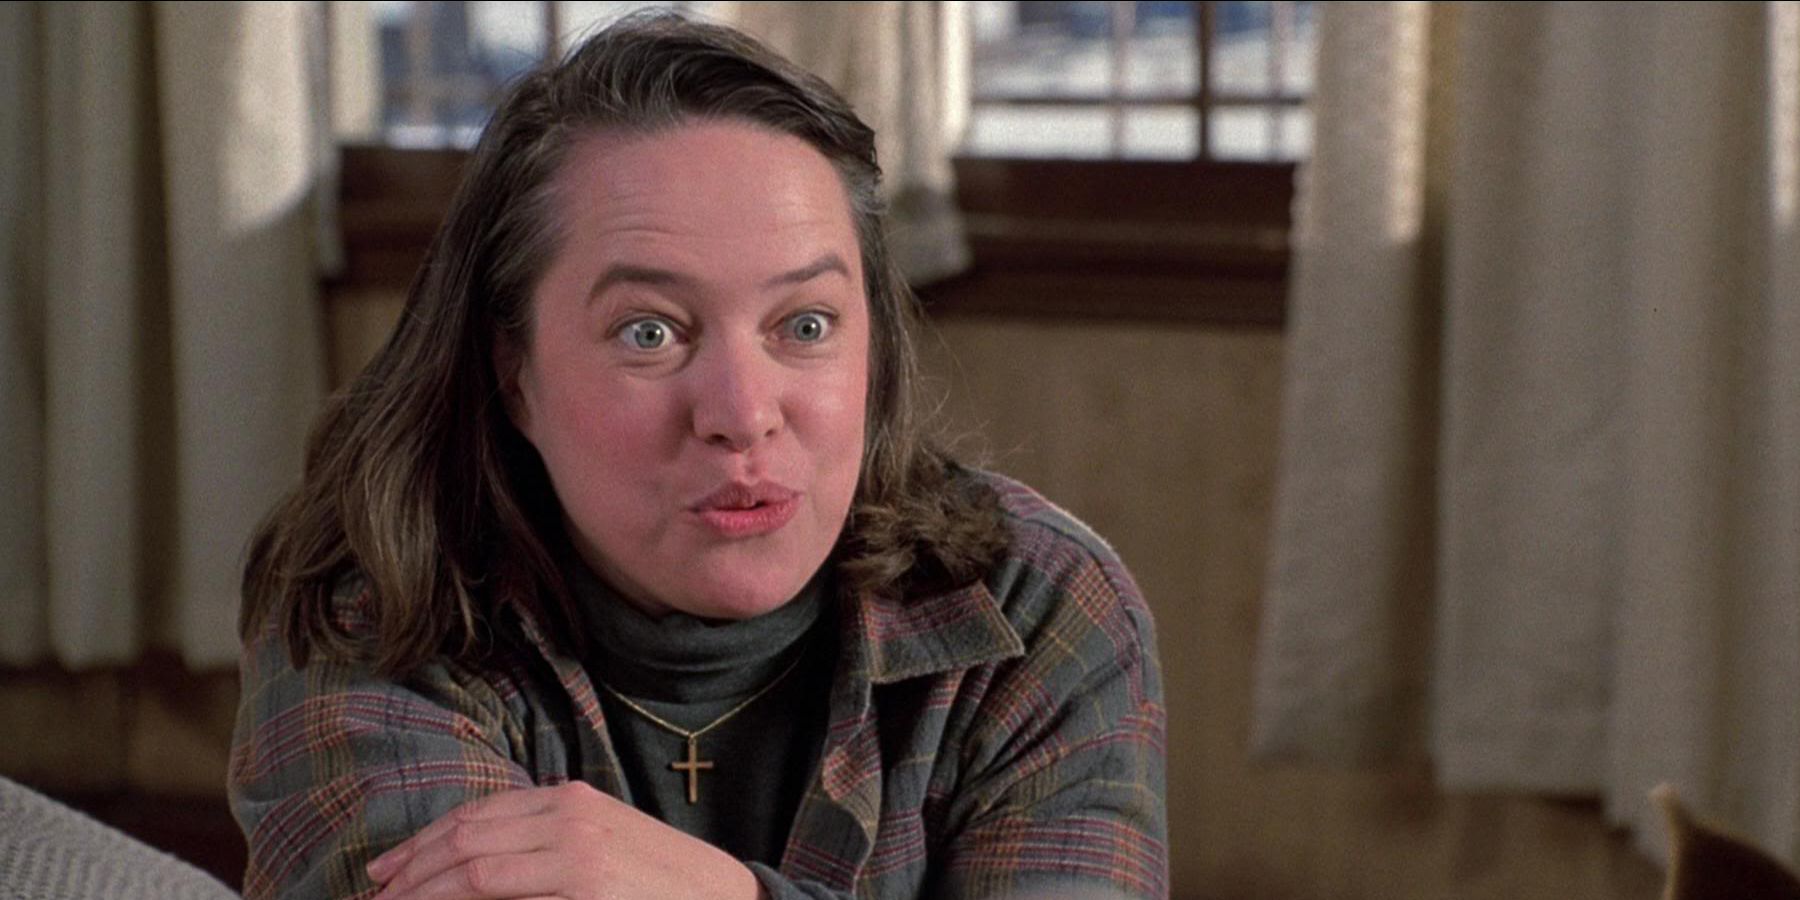 Kathy Bates in her breakout role in the movie Misery